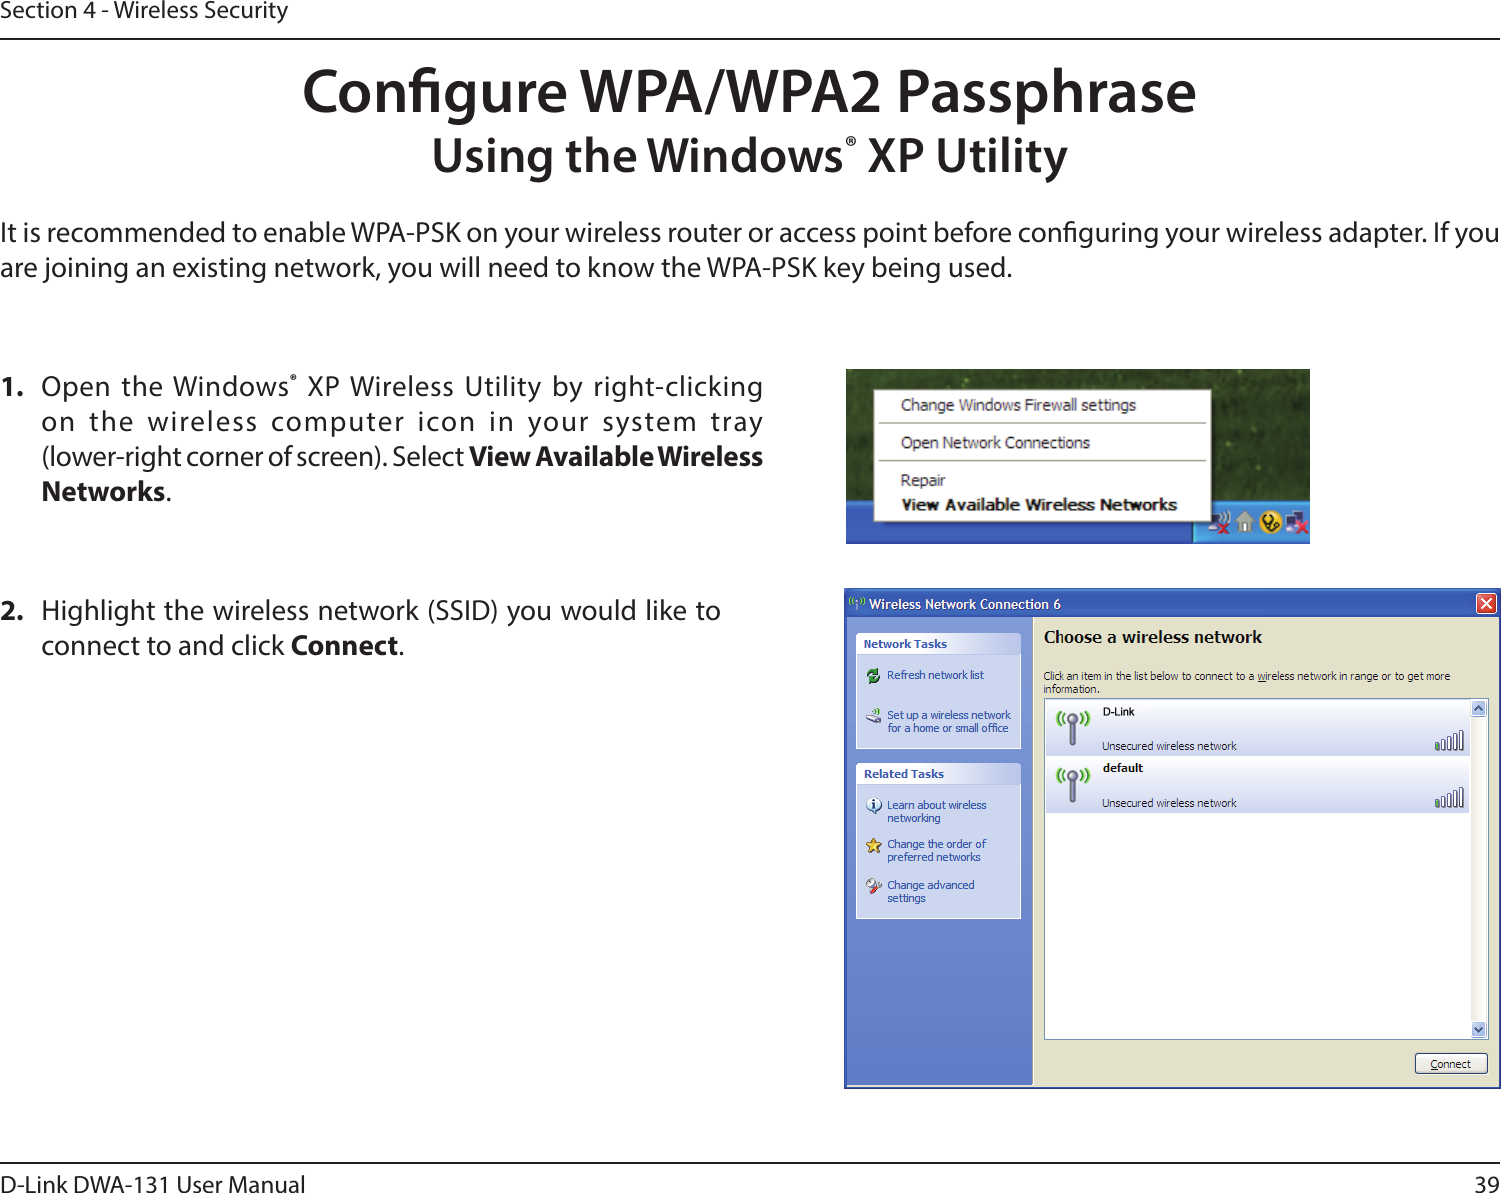 39D-Link DWA-131 User ManualSection 4 - Wireless SecurityCongure WPA/WPA2 PassphraseUsing the Windows® XP UtilityIt is recommended to enable WPA-PSK on your wireless router or access point before conguring your wireless adapter. If you are joining an existing network, you will need to know the WPA-PSK key being used.2.  Highlight the wireless network (SSID) you would like to connect to and click Connect.1.  Open the Windows® XP Wireless Utility by right-clicking on  the  wireless  computer  icon  in  your  system  tray  (lower-right corner of screen). Select View Available Wireless Networks. 